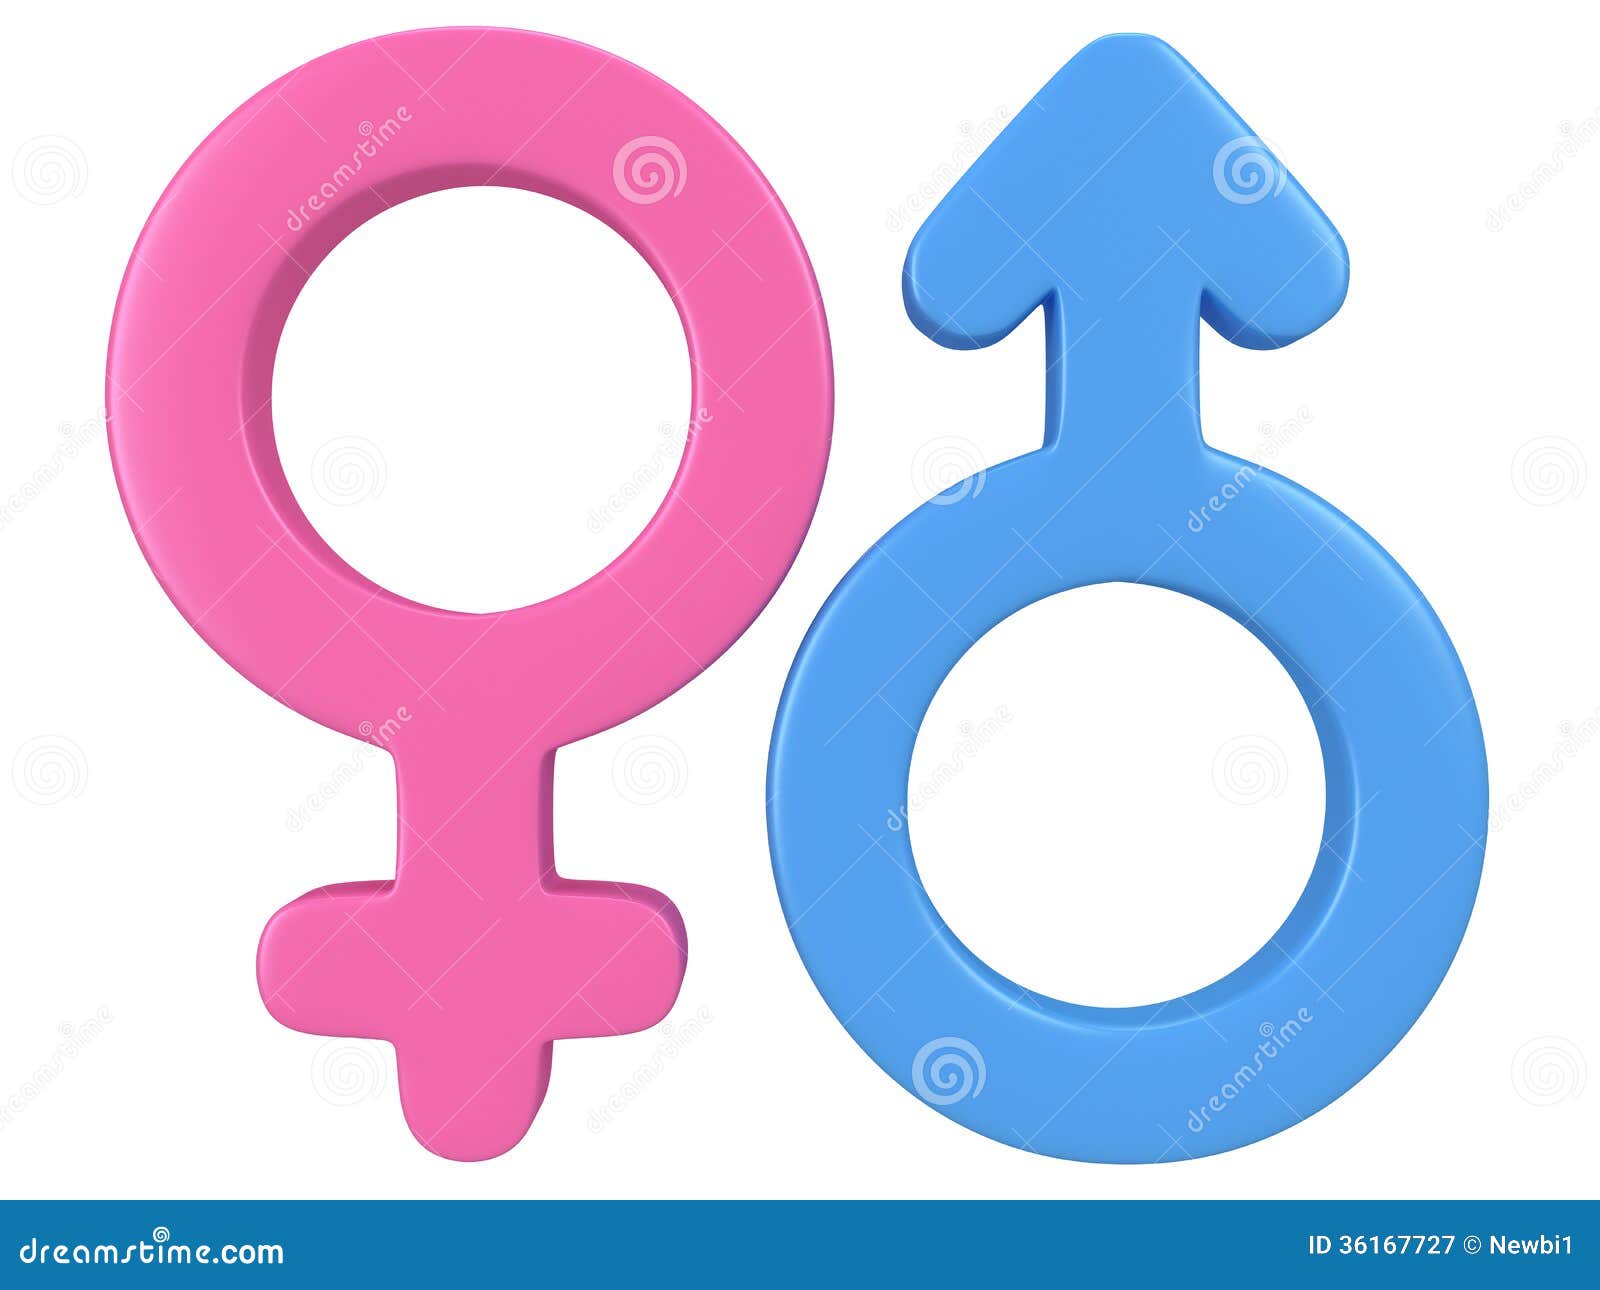 3d Illustration Of Male And Female Signs Stock